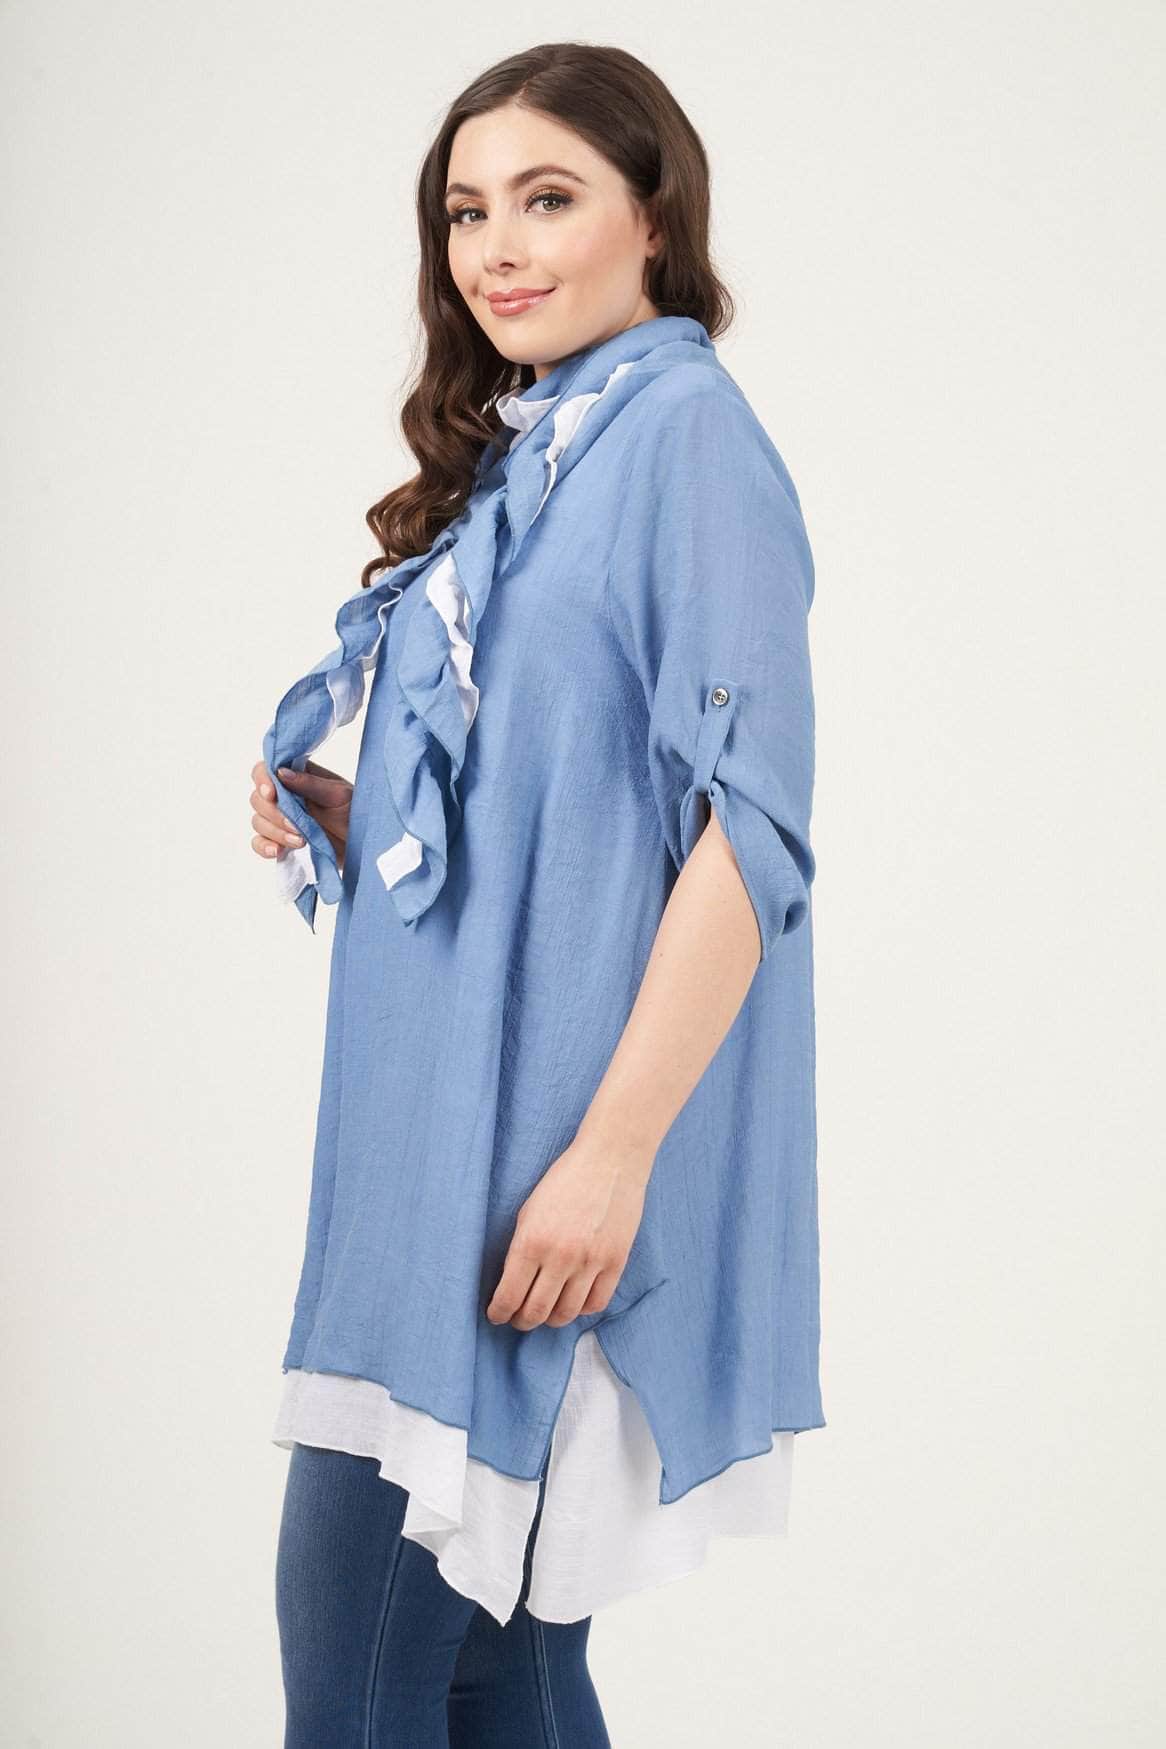 Saloos Tunic Raelynn Linen-Look Layered Tunic with Scarf